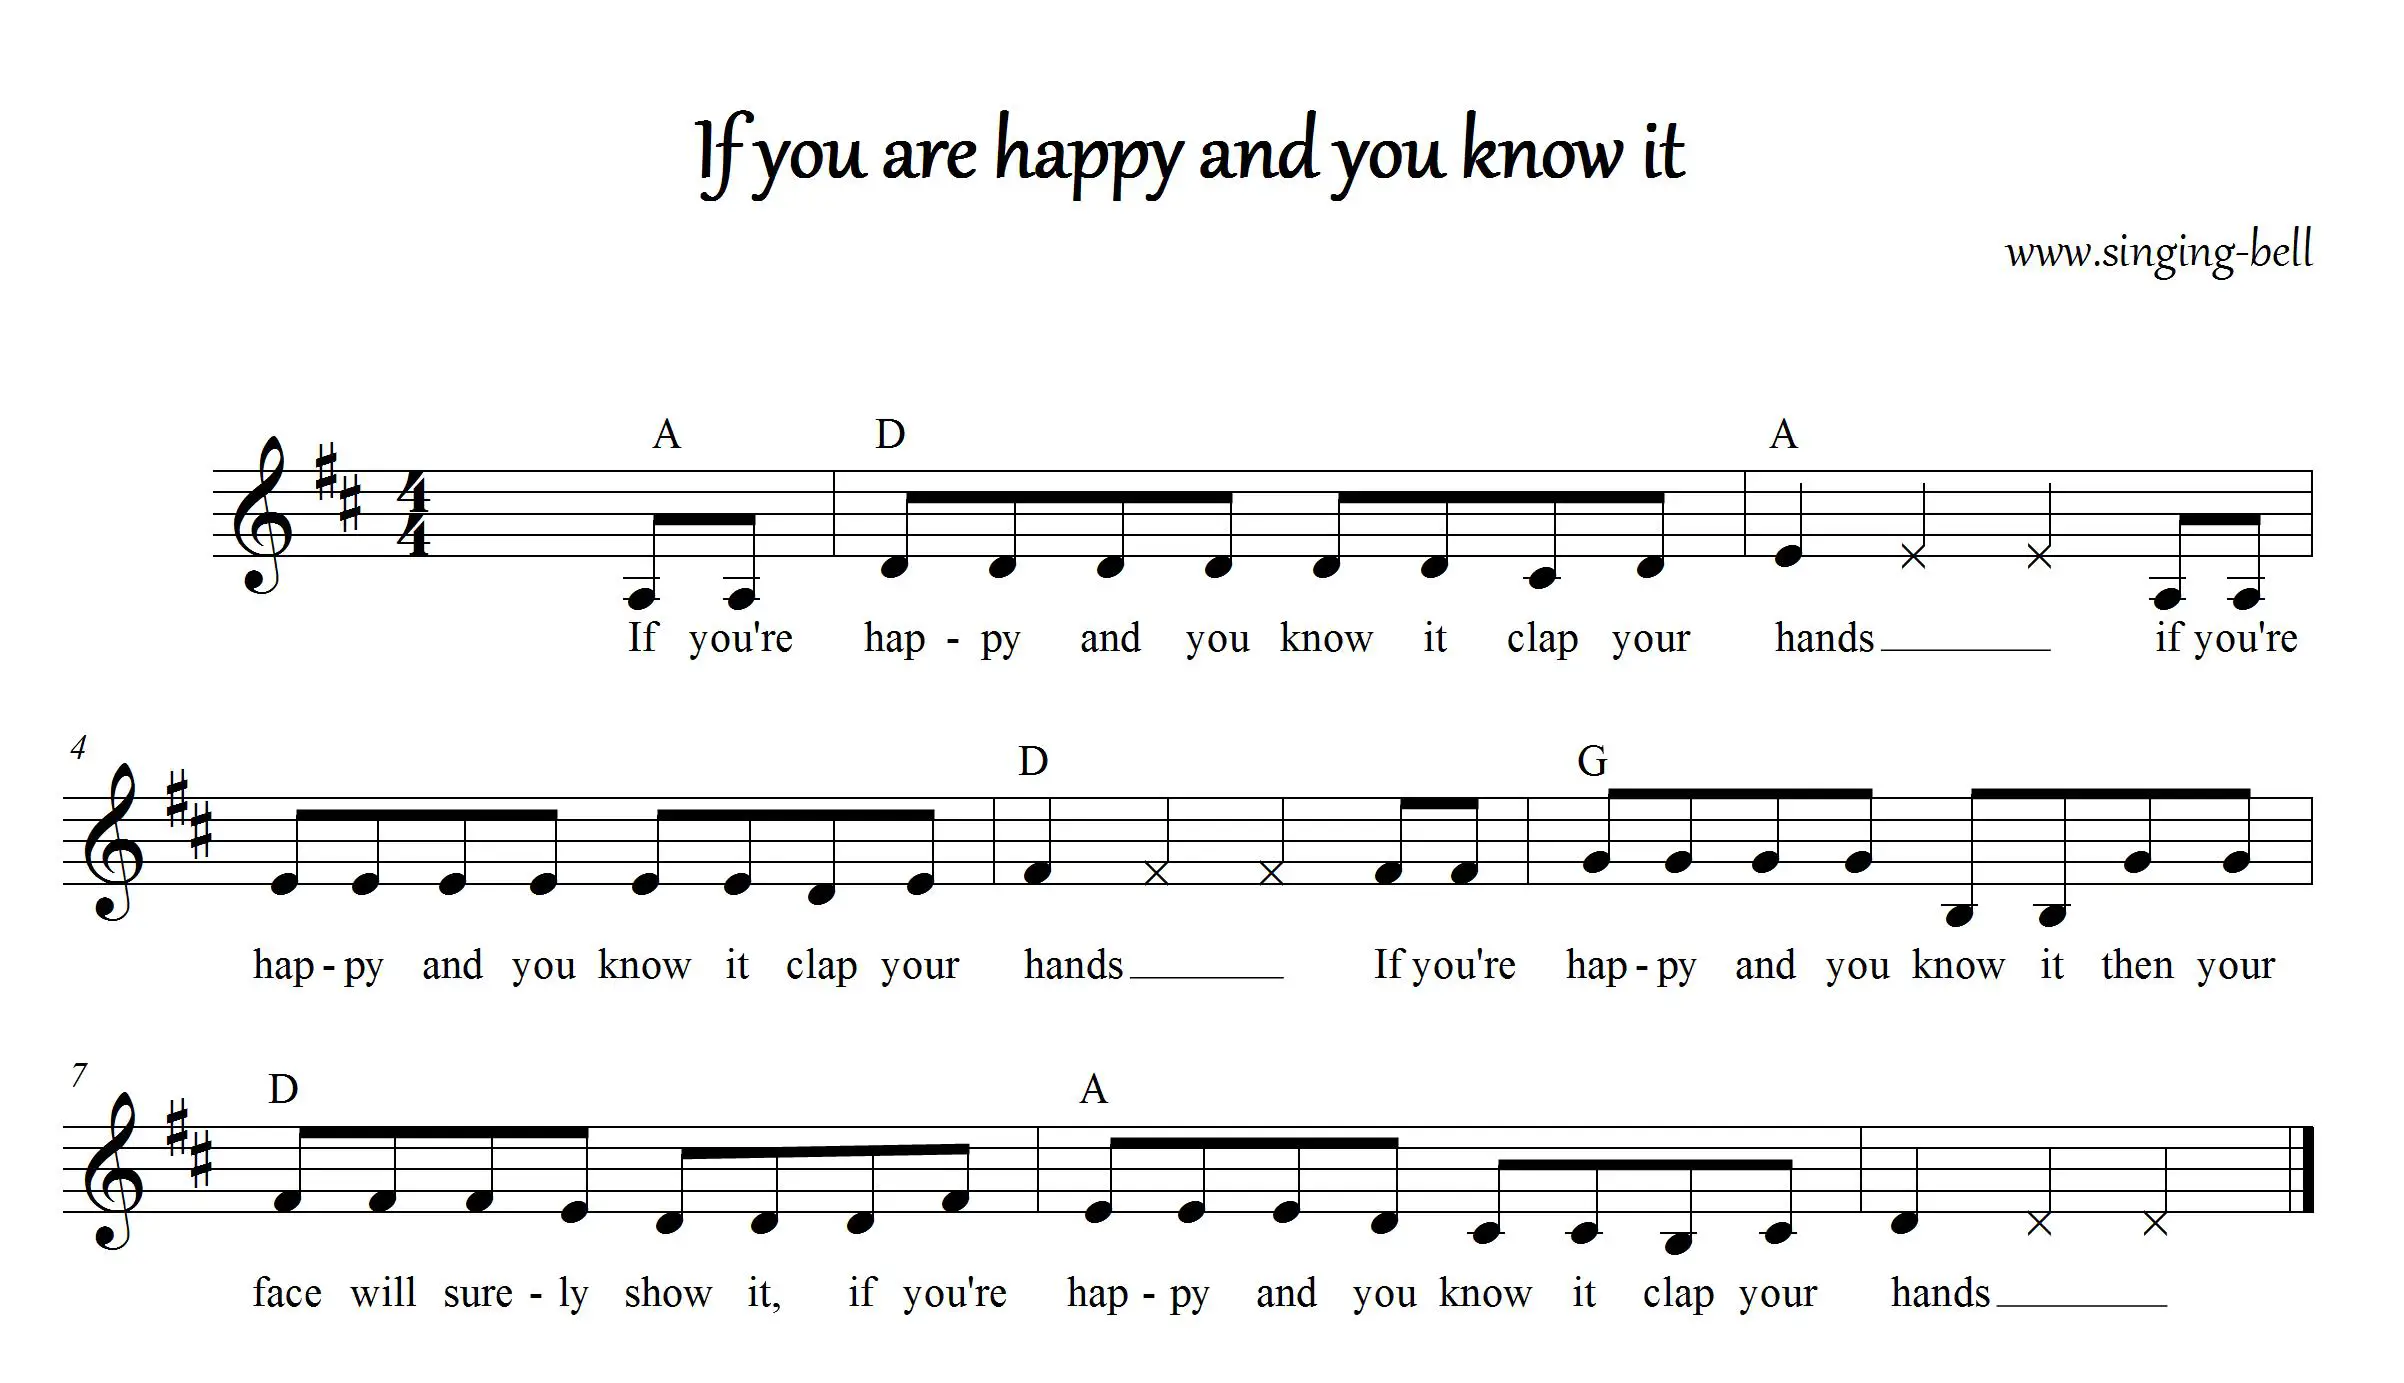 If you are happy and you know it_D_singing-bell